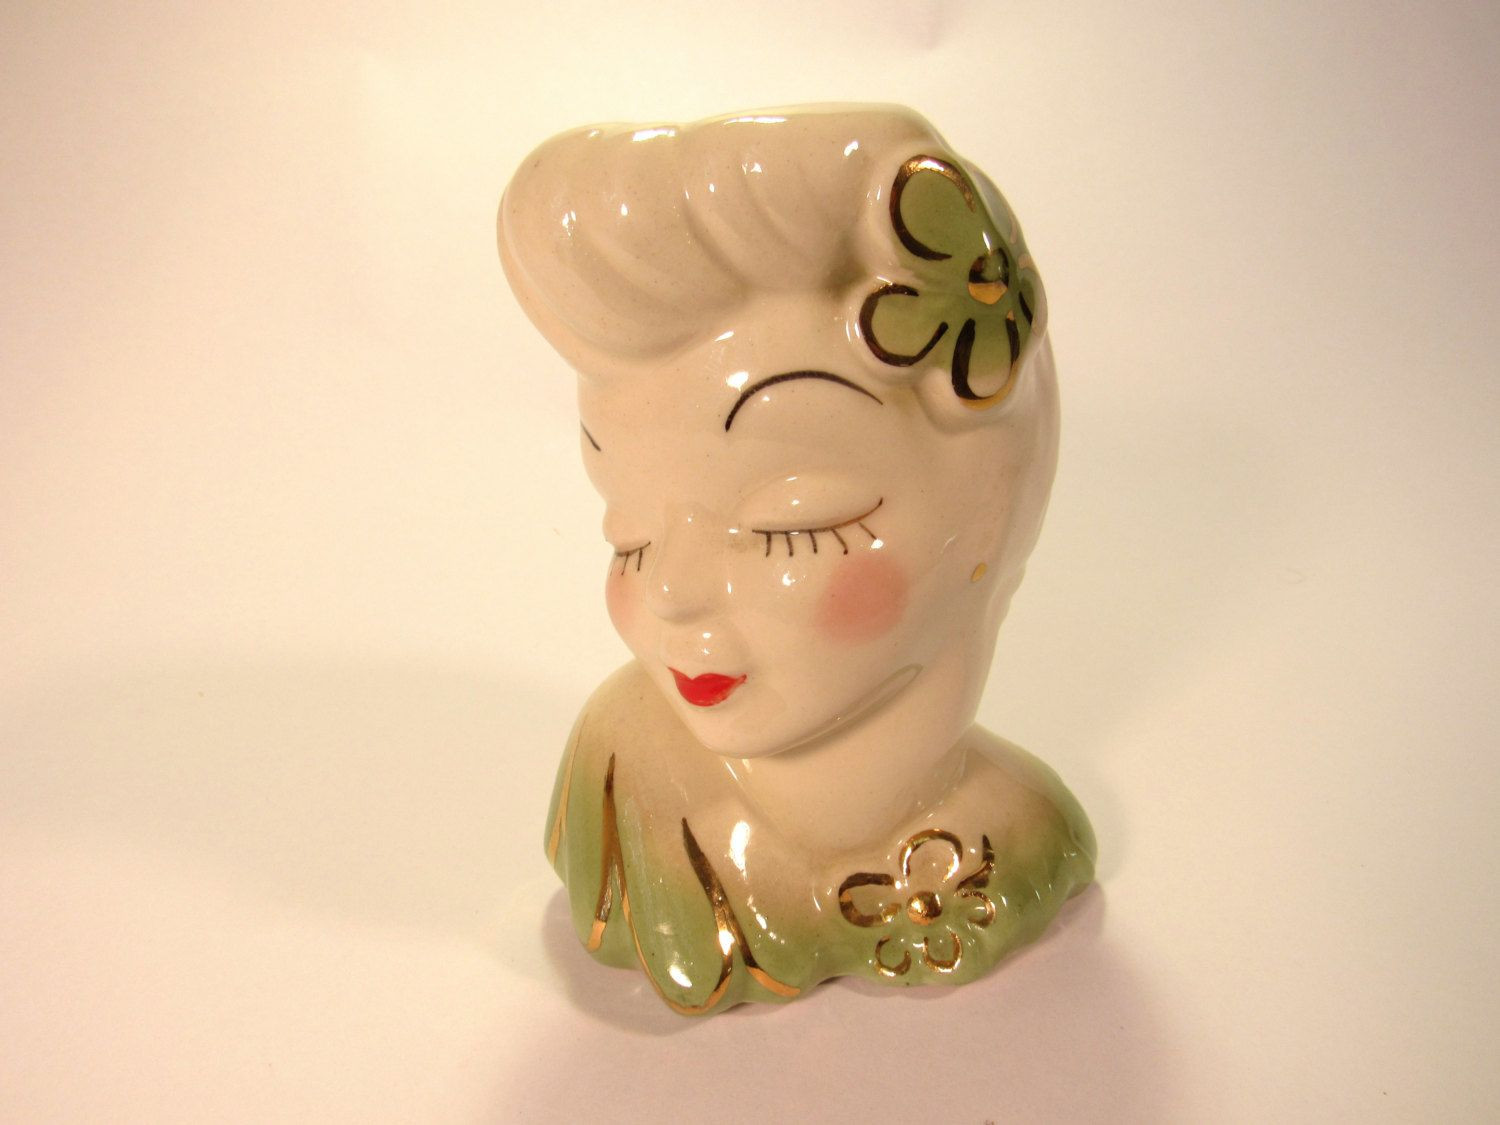 18 Recommended Ceramic Head Vase 2024 free download ceramic head vase of glamour girl head vase green dress flower in hair red lips and for glamour girl head vase green dress flower in hair red lips and gold trim the vase is 6 tall and was ma